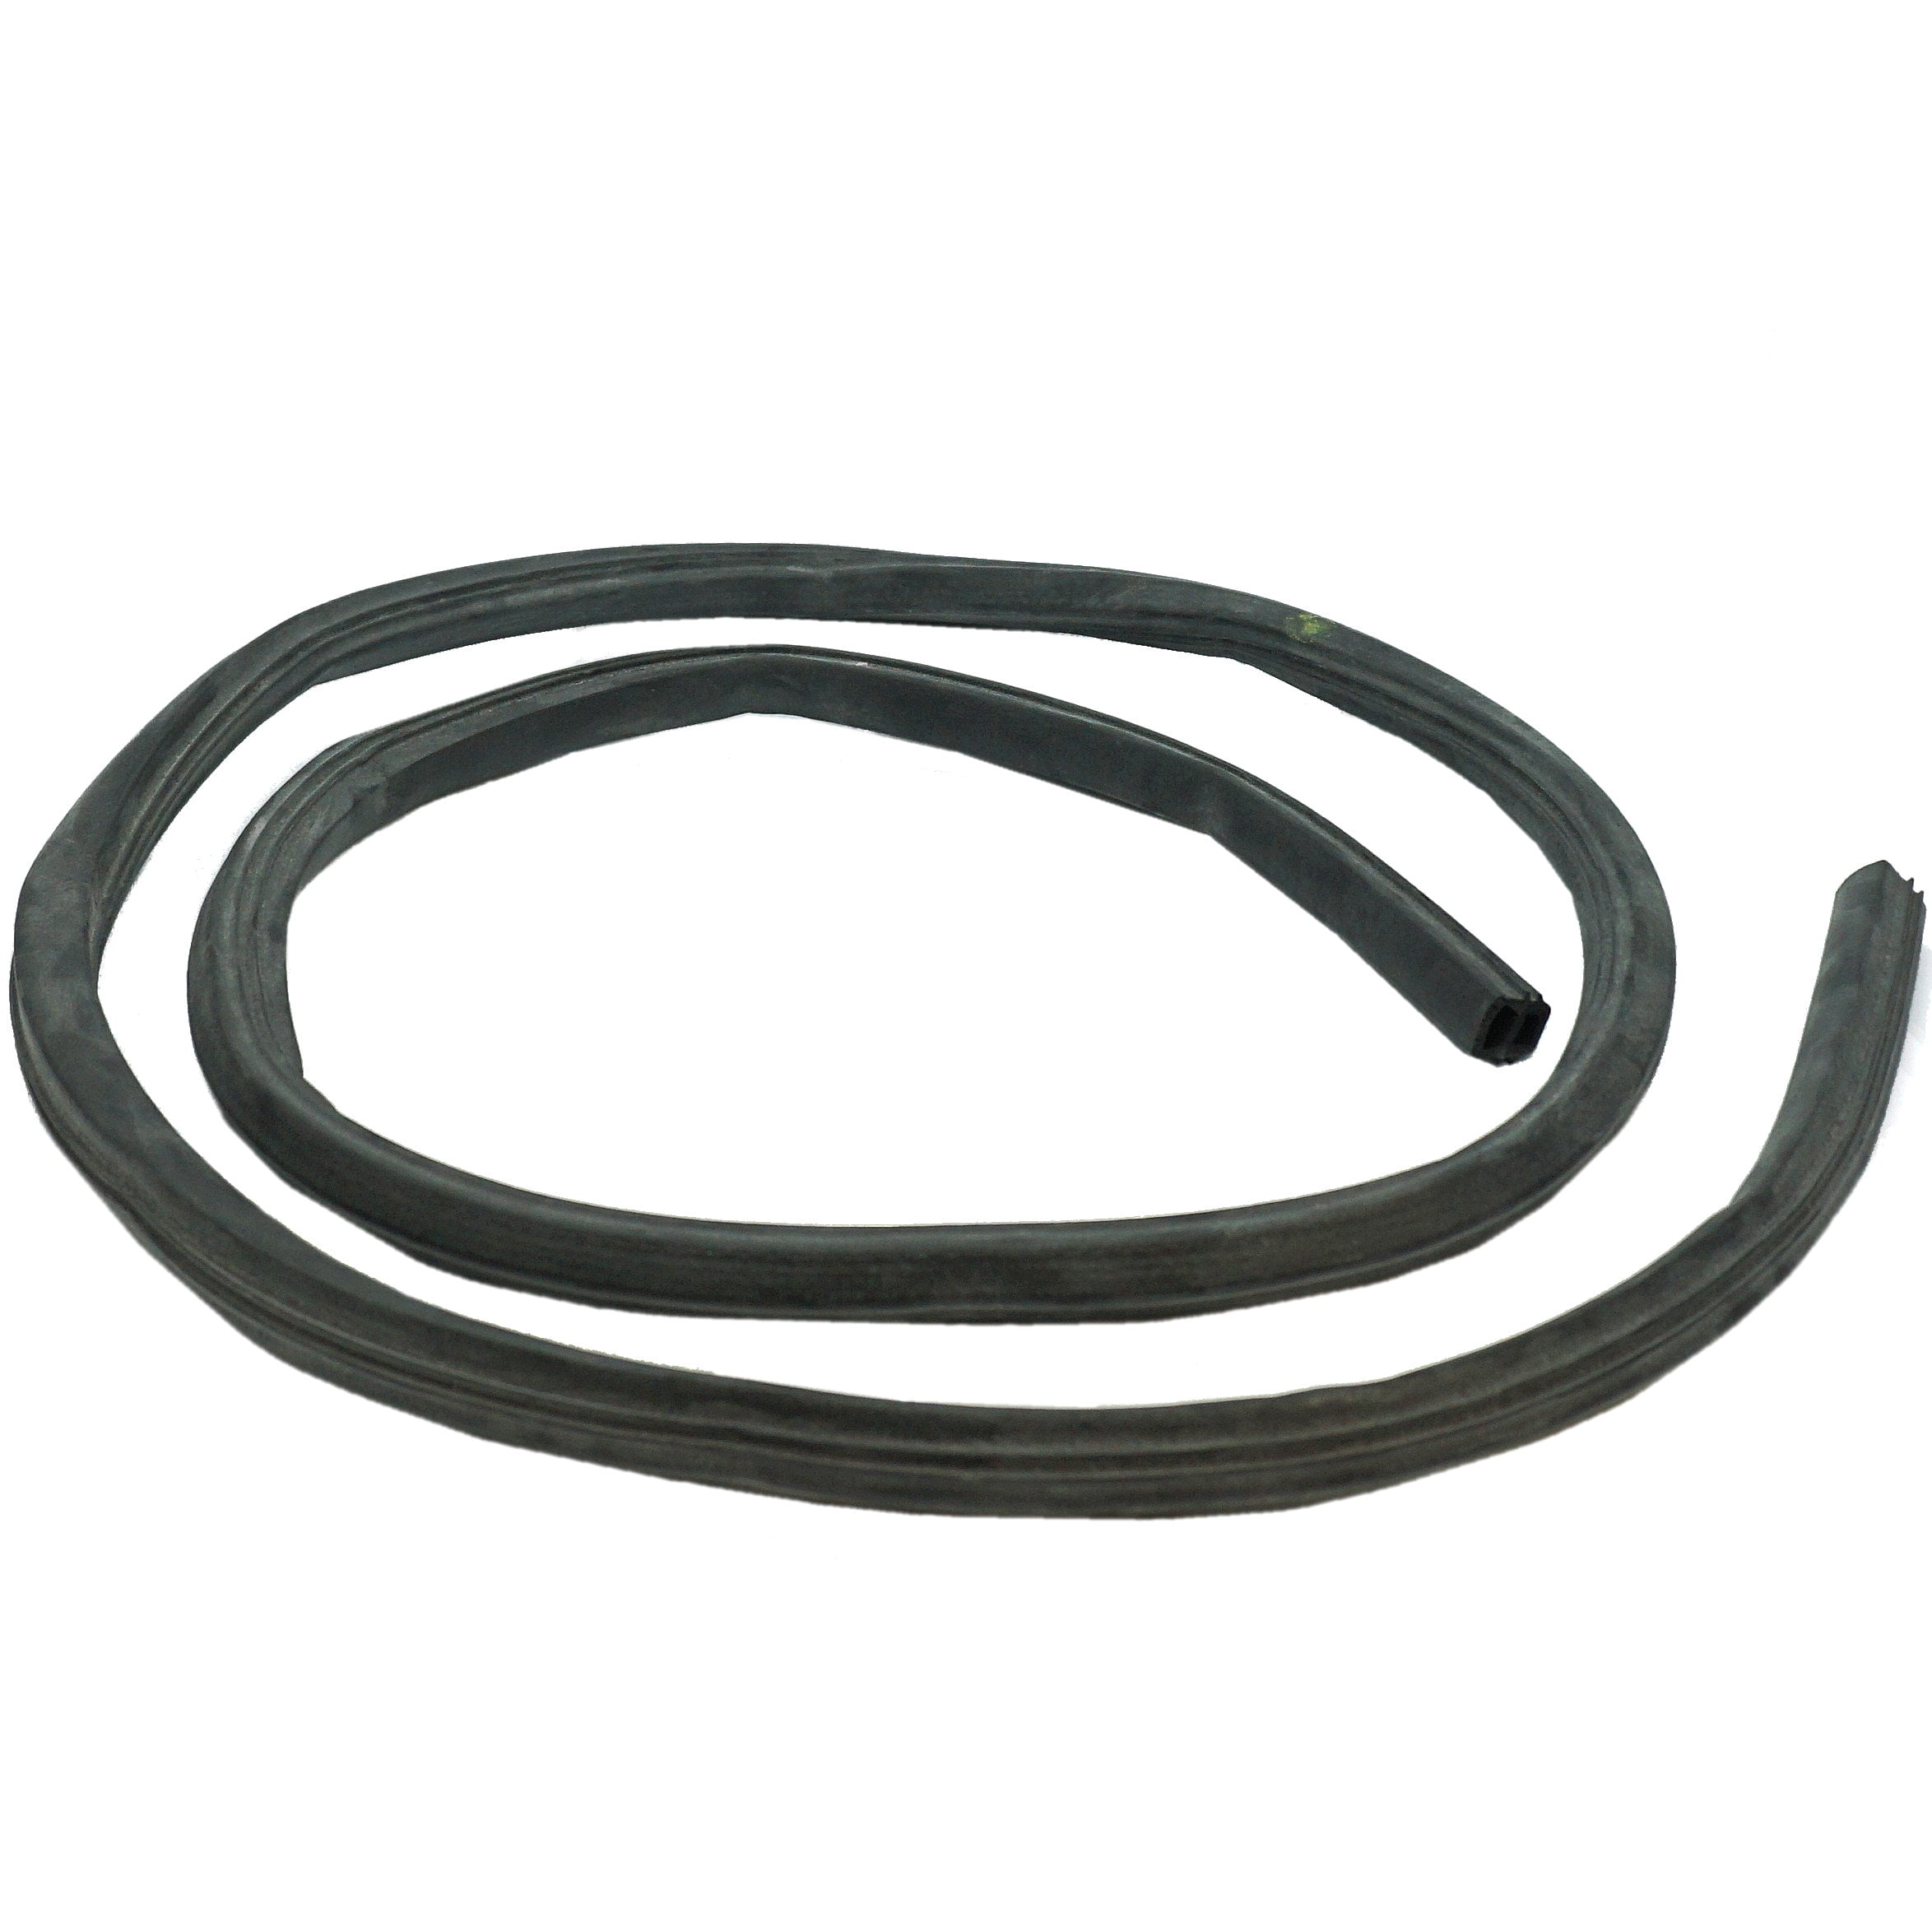 Inner Door Rubber Gasket Seal for WHIRLPOOL Dishwasher Top Spare Part 